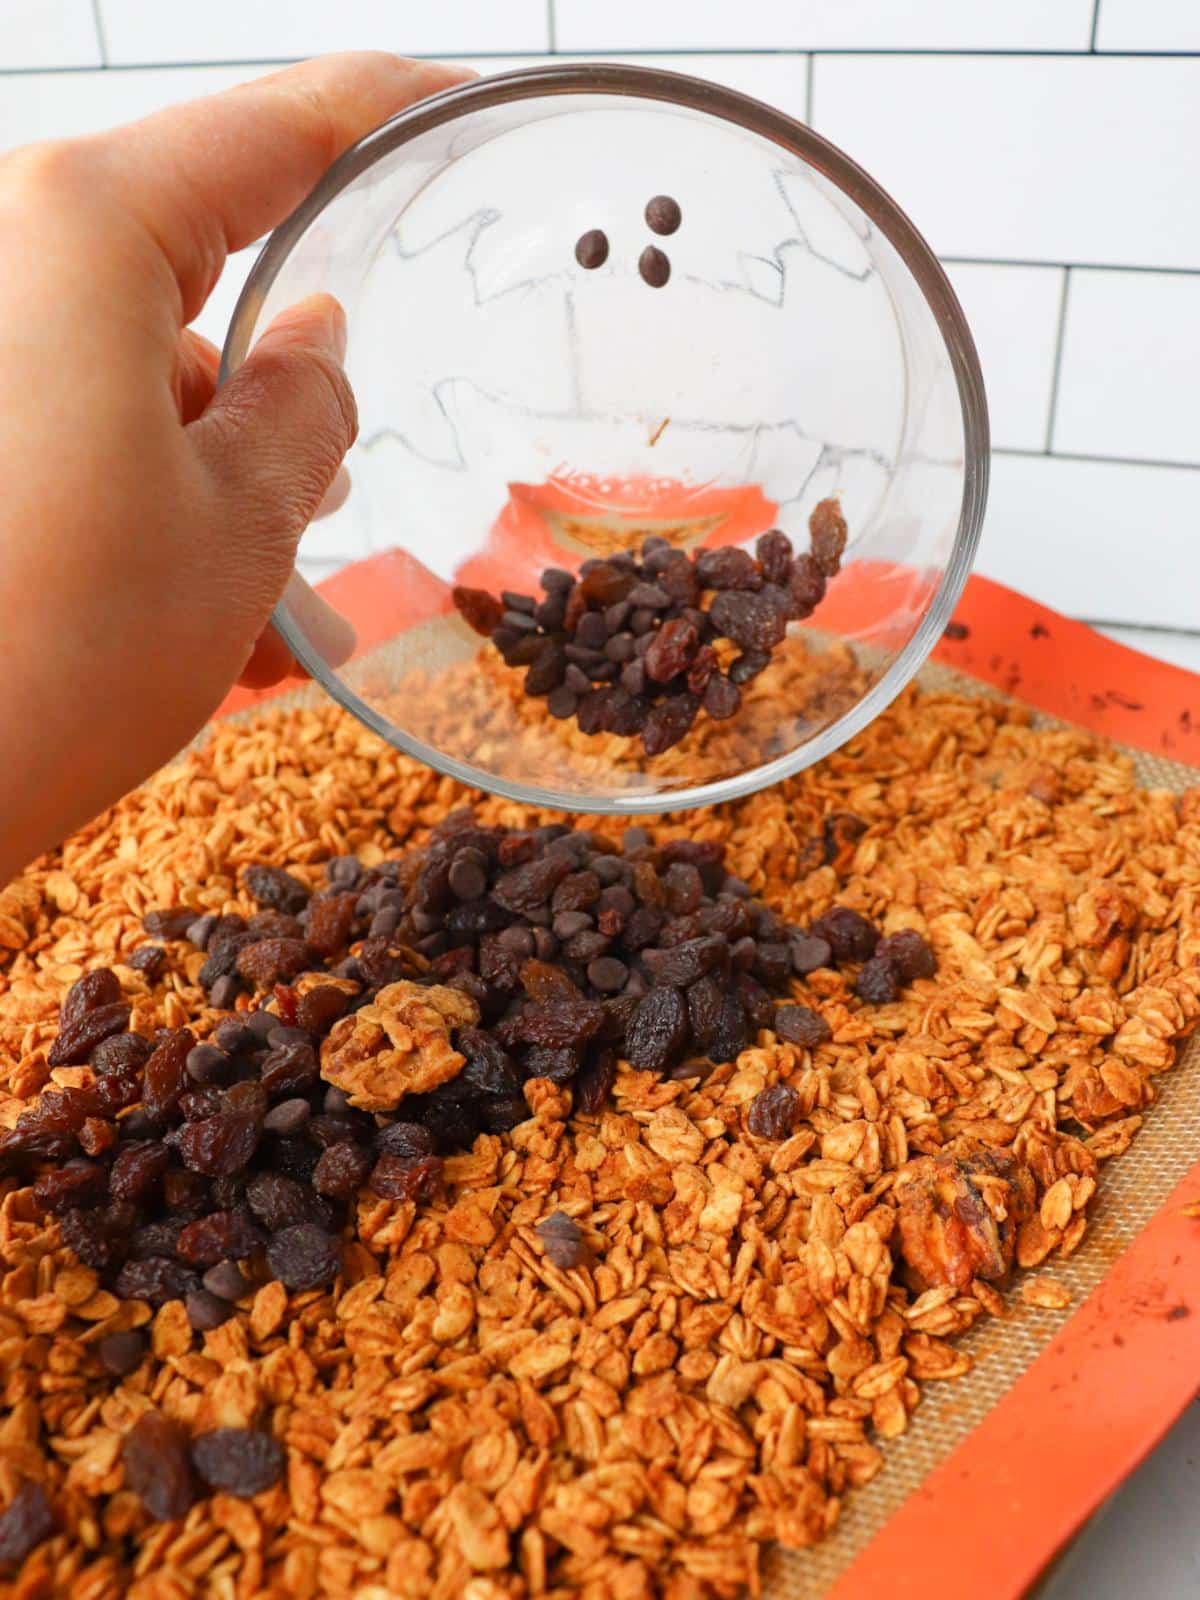 A hand mixing in raisins and chocolate chips into vegan granola.